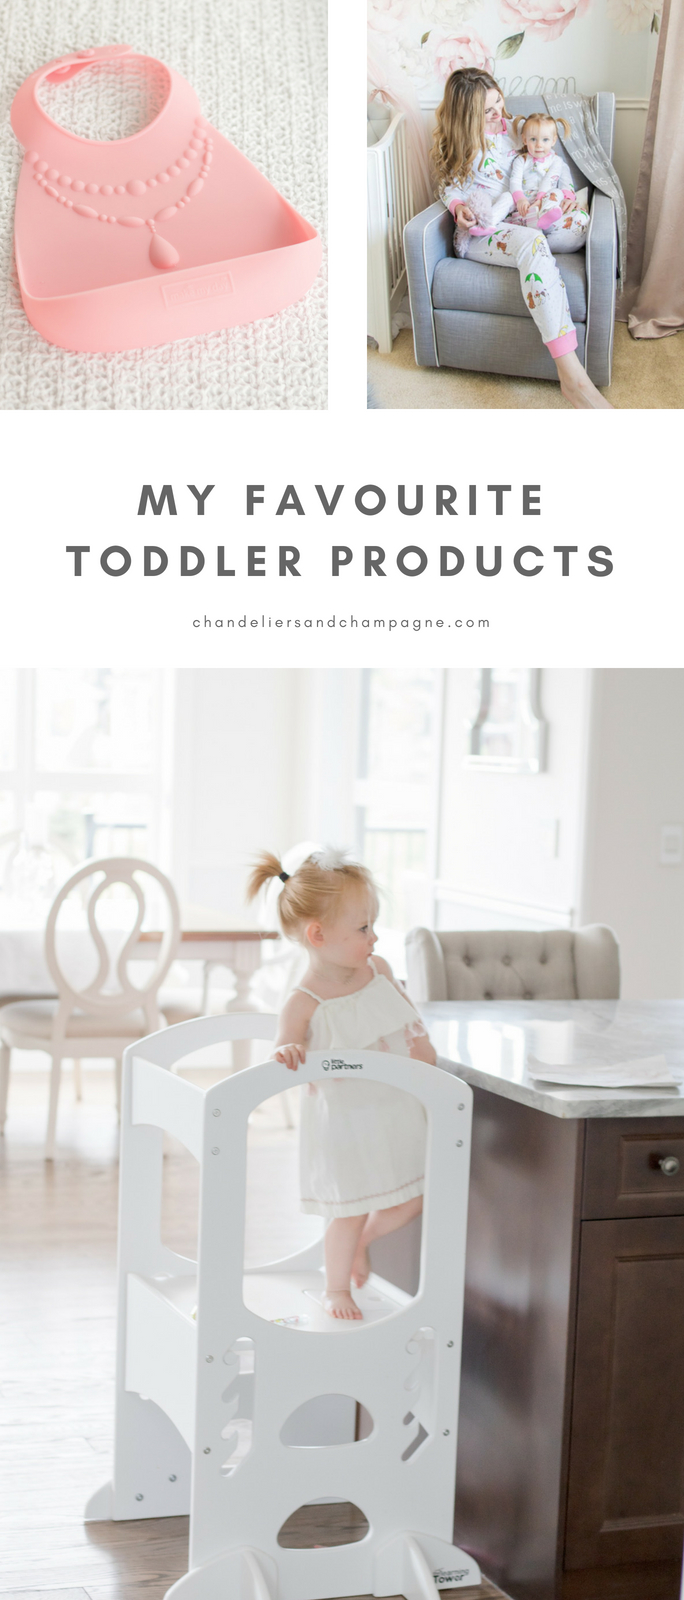 My Favourite Toddler Products - Best Items to Buy As New Parents - Toddler Products that Make Life Easier - Learning Tower - Make My Day Bibs